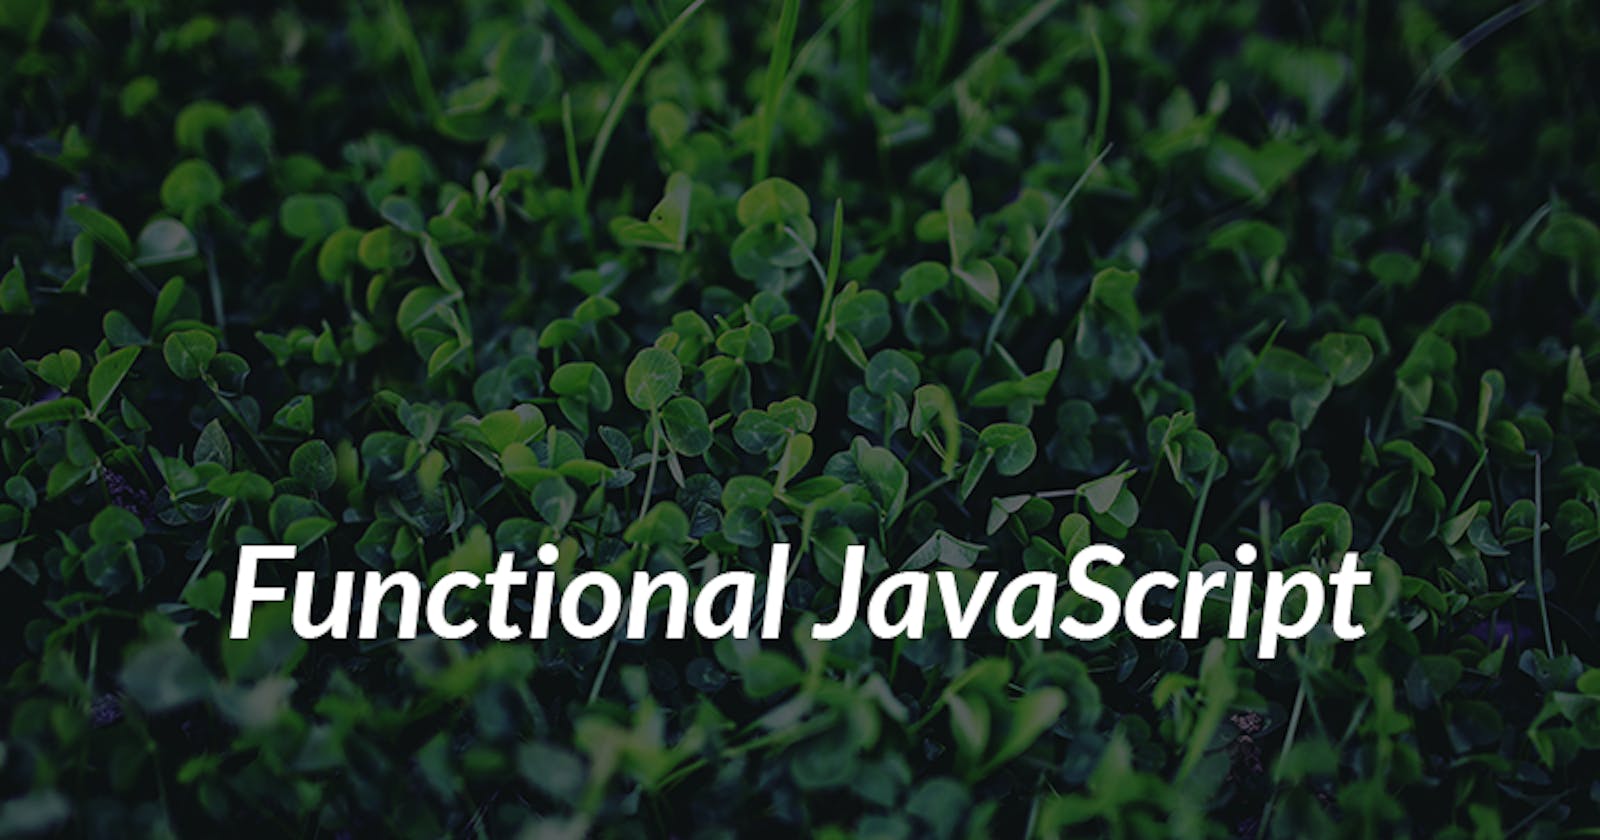 A gentle introduction to Functional JavaScript